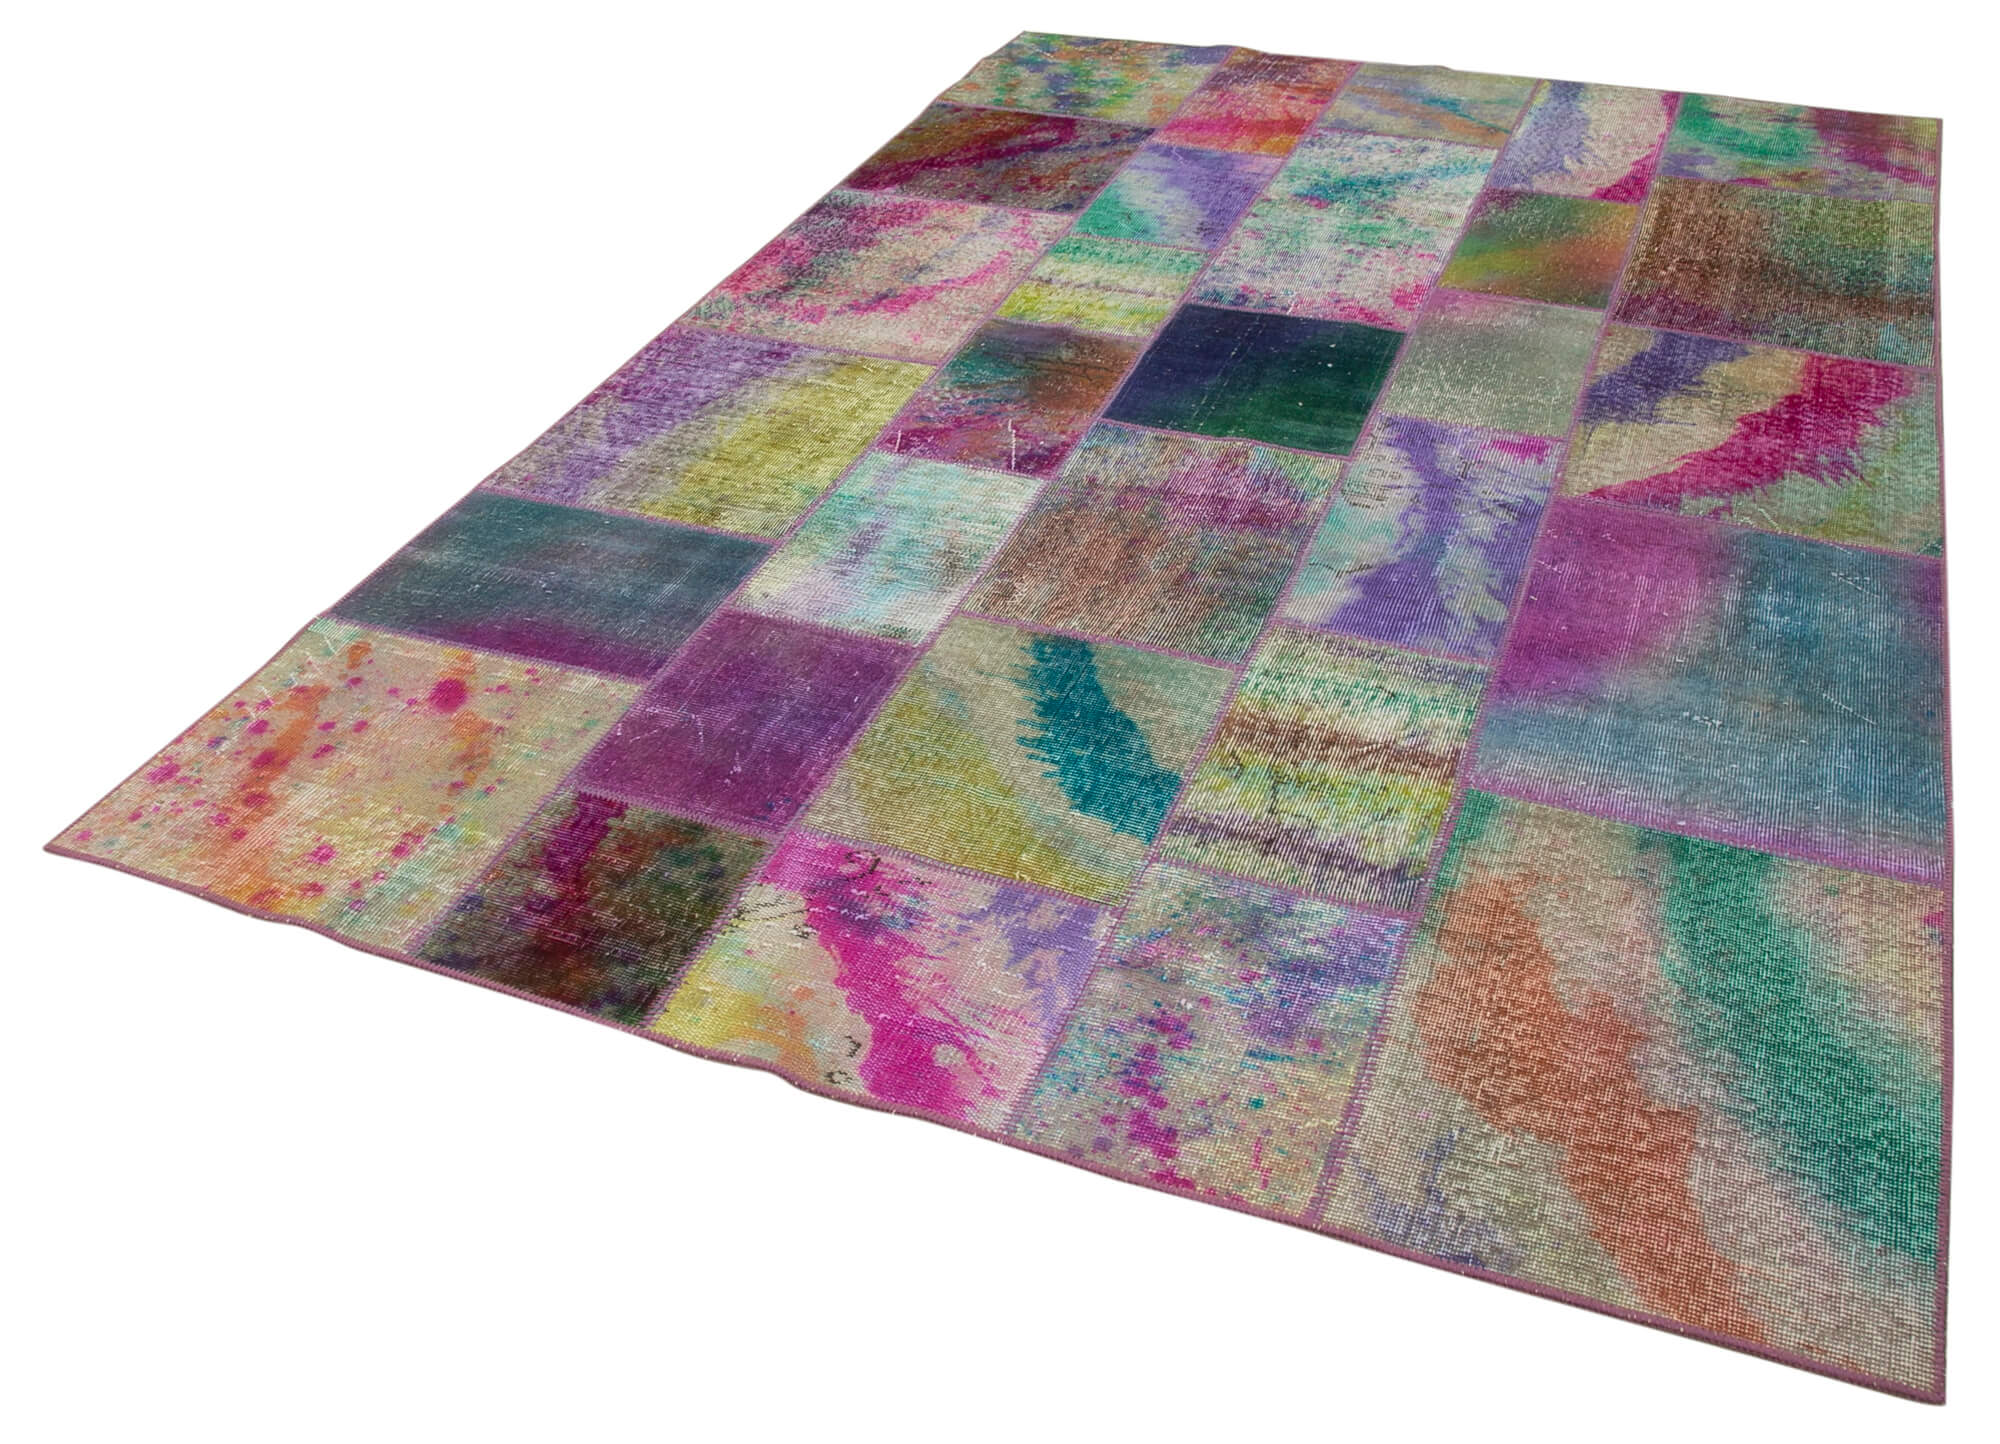 6x10 Multicolor Overdyed Wool Patchwork Area Rug -9300